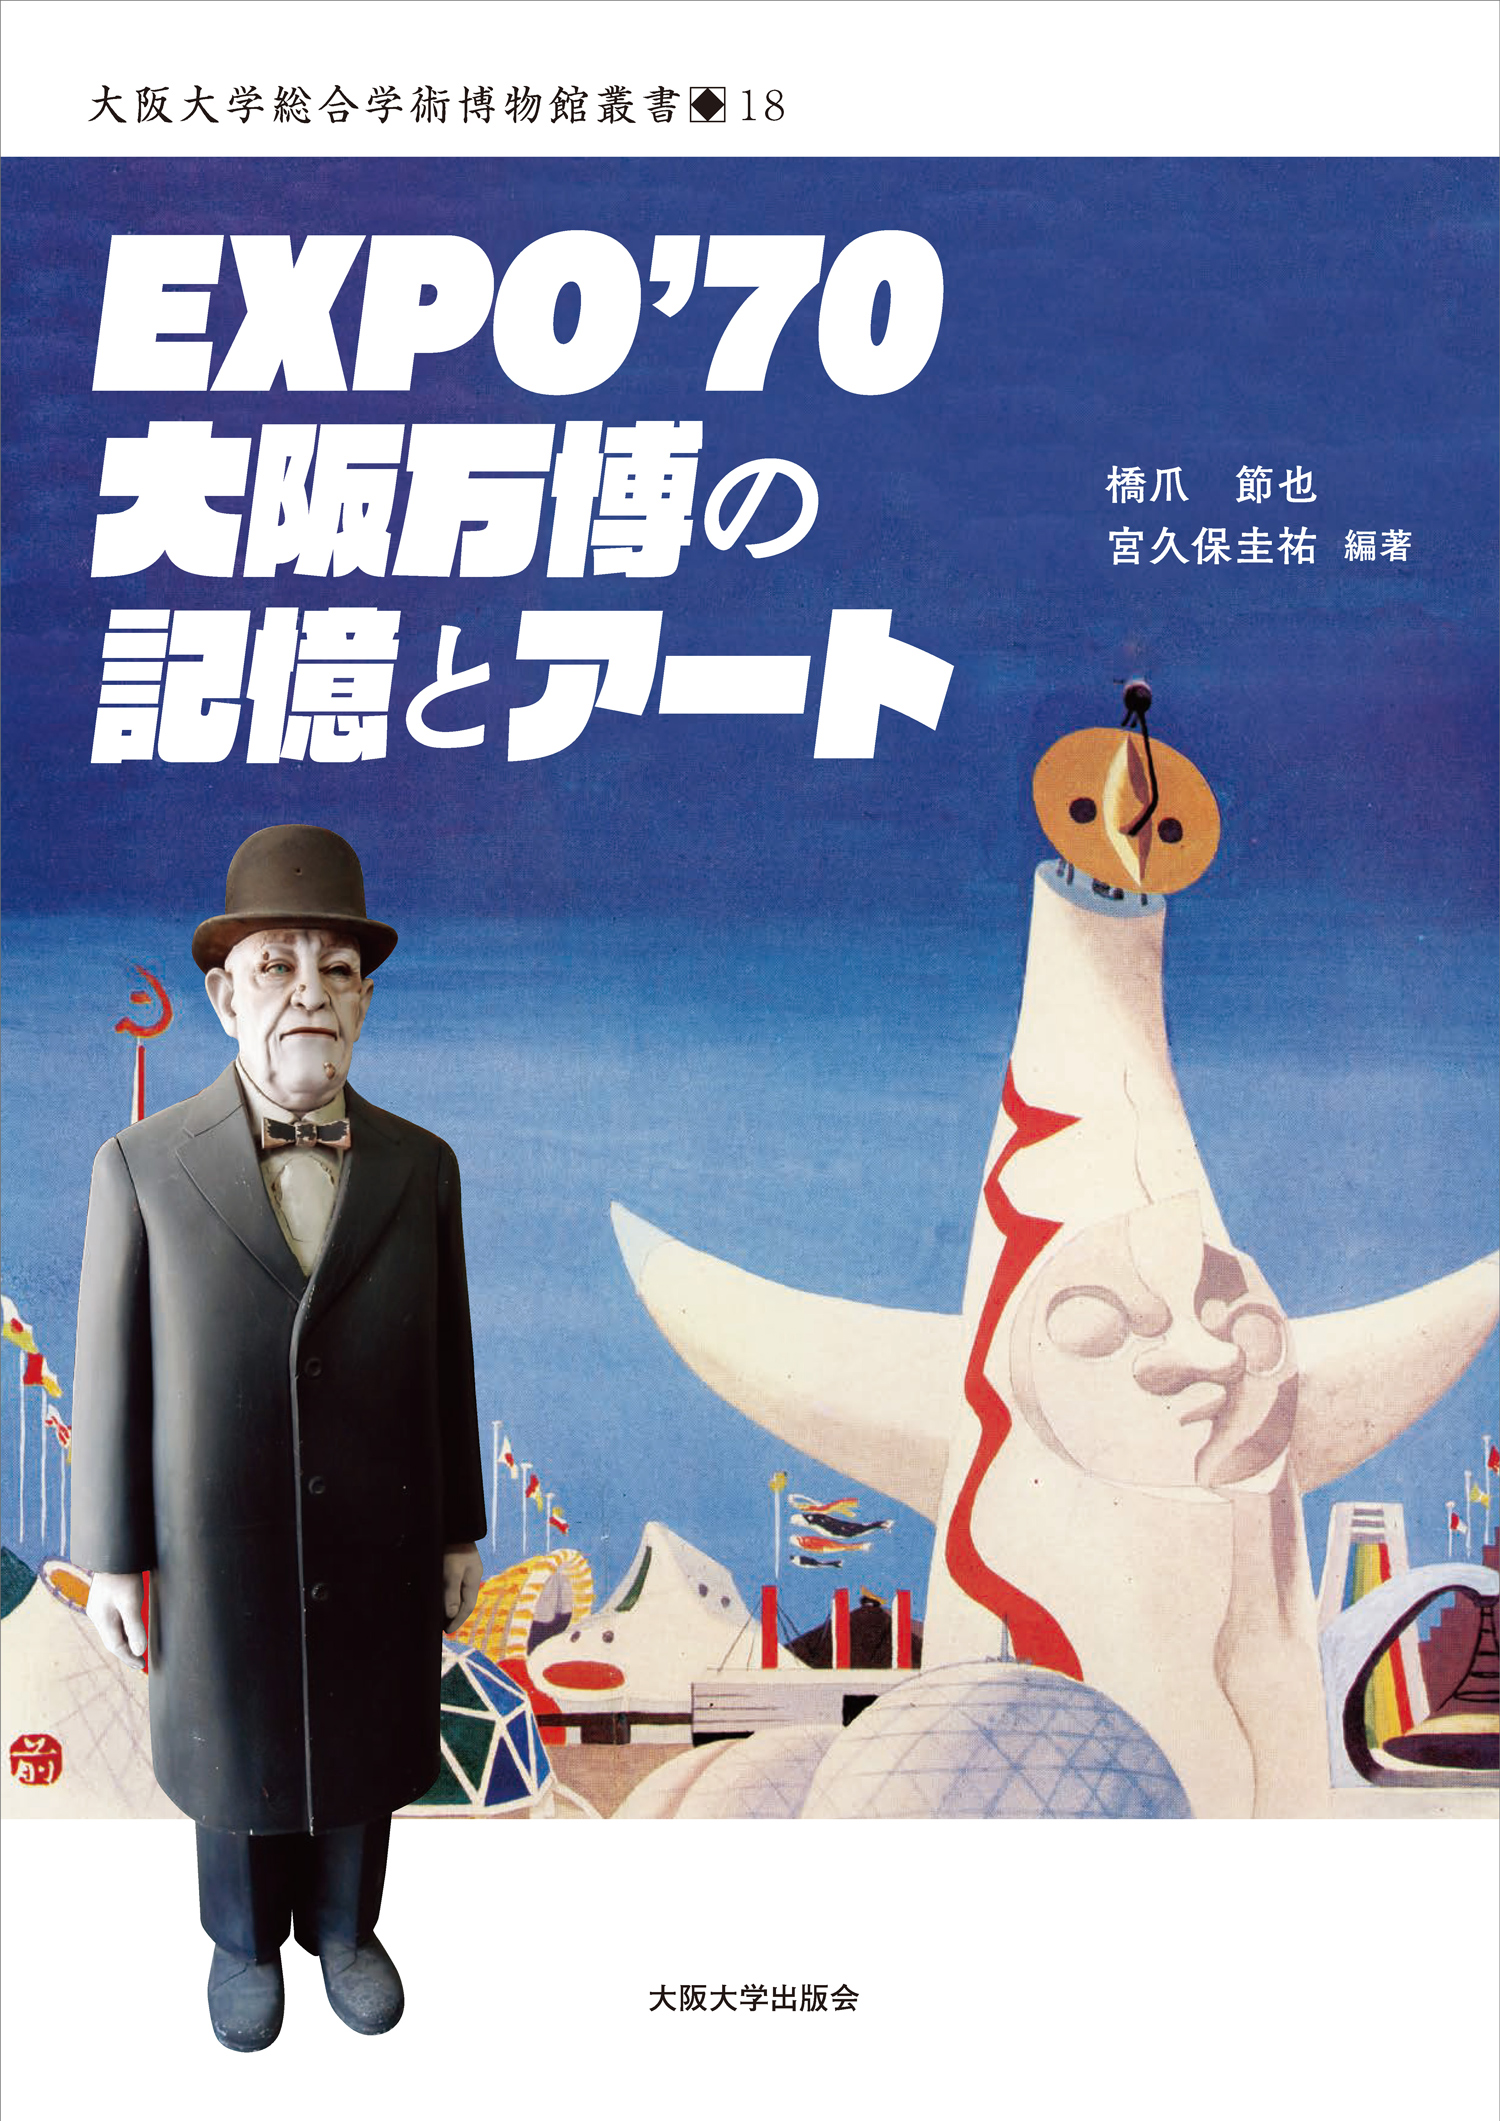 EXPO'70 大阪万博の記憶とアート